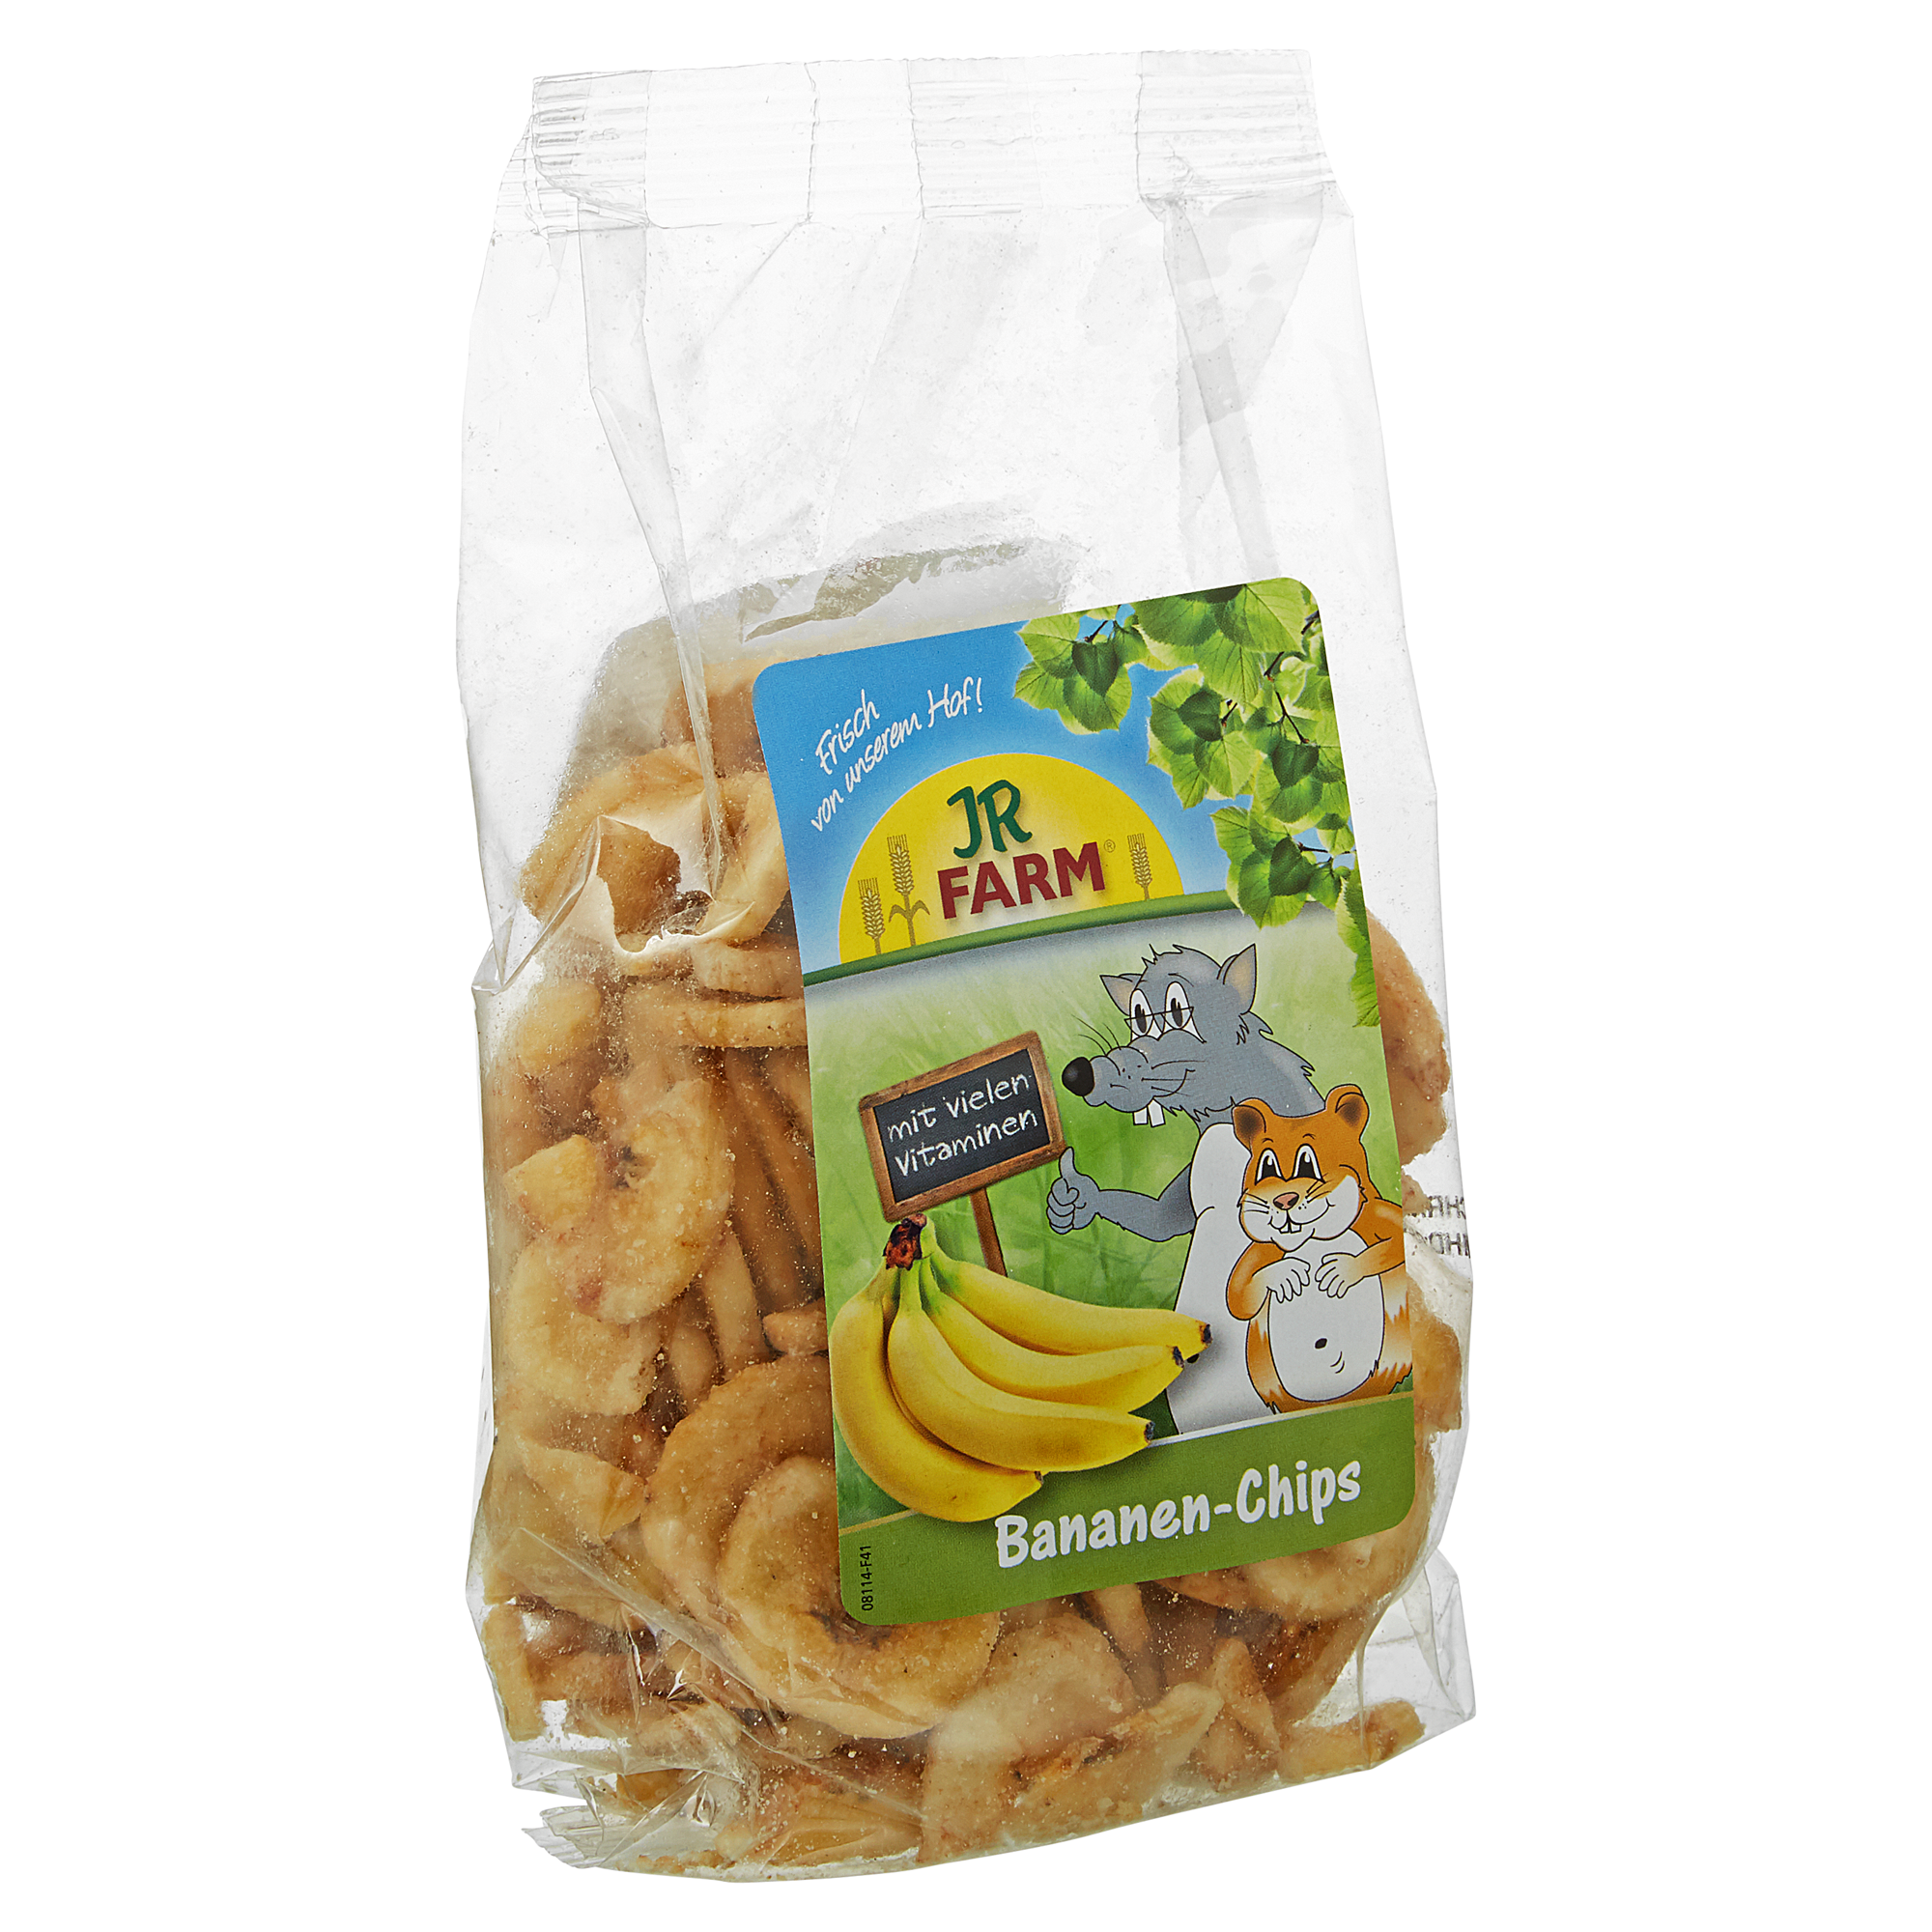 Nagersnack Bananen-Chips 0,15 kg + product picture